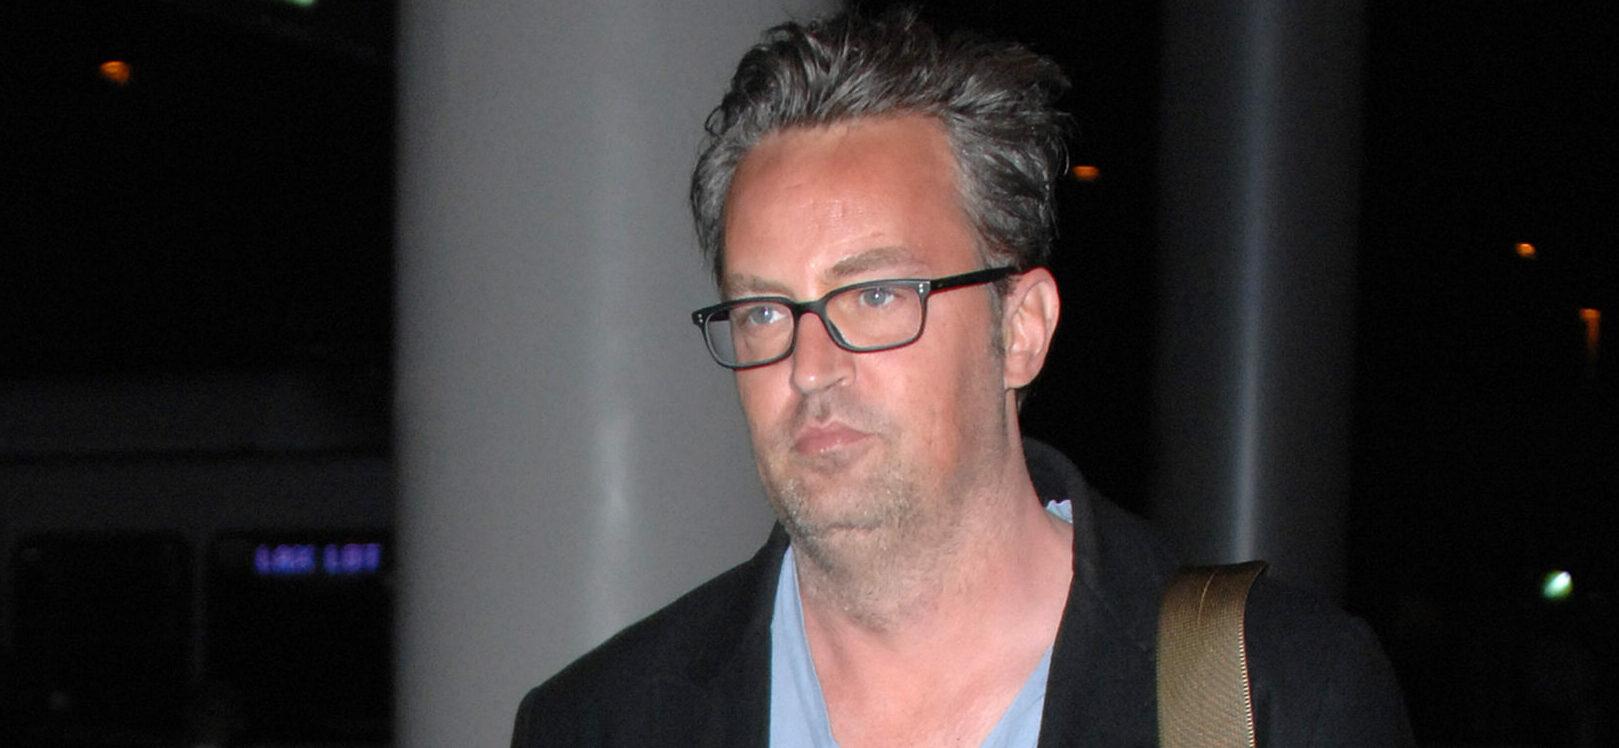 Fans Believe Matthew Perry’s Final Posts With Bat-Signals Were A ‘Call For Help’